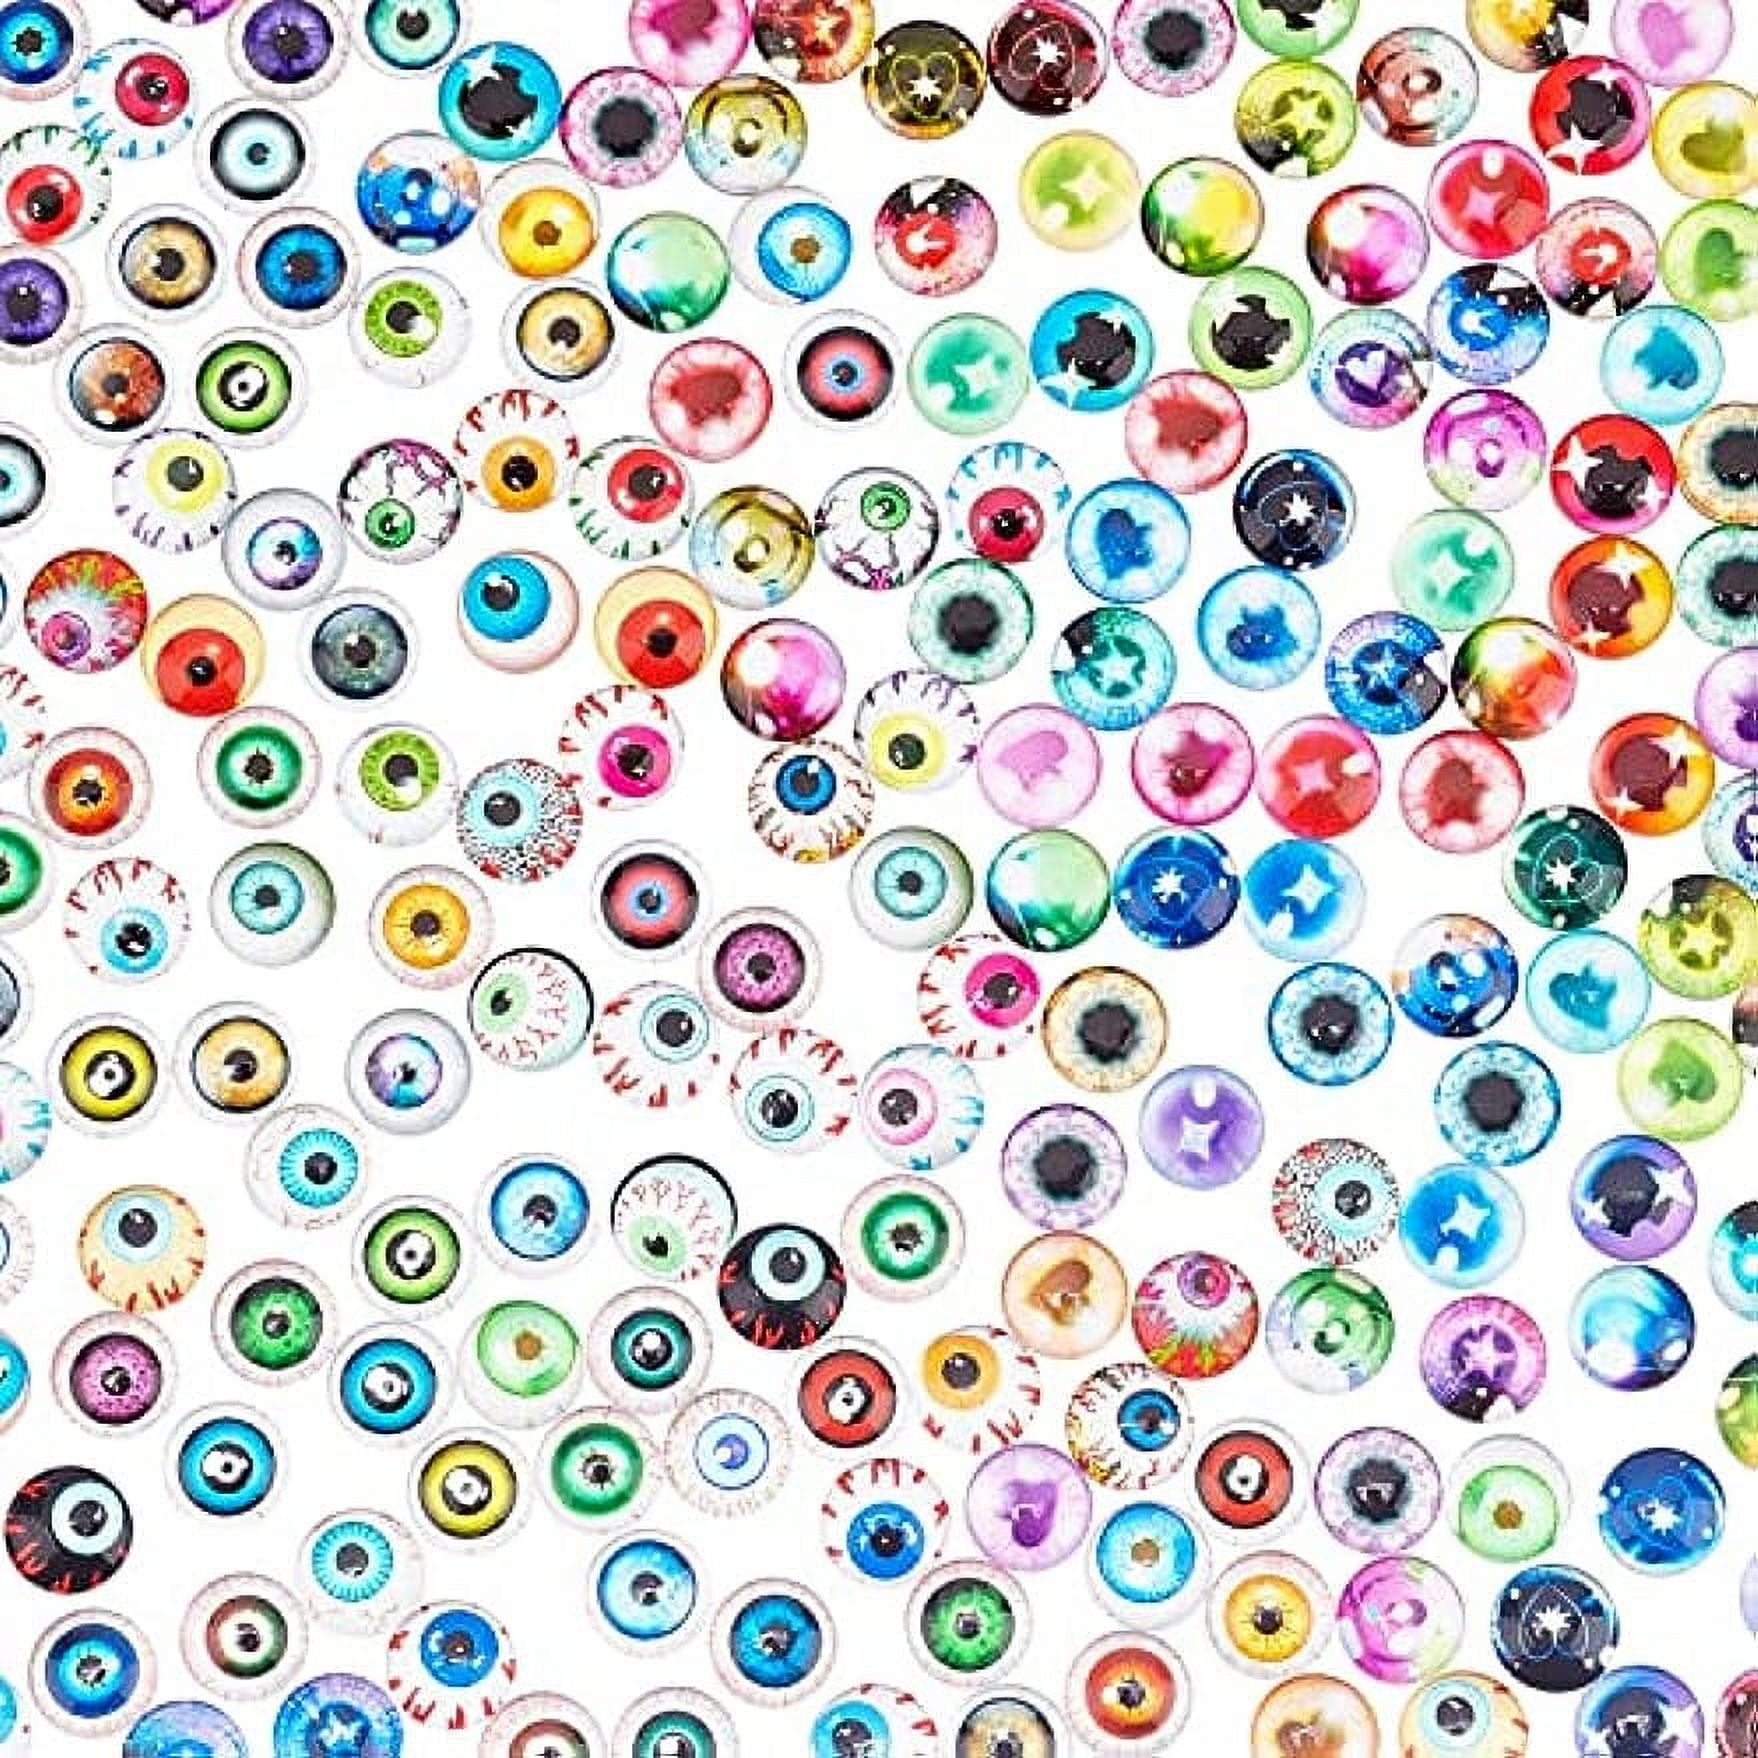 TEHAUX 50 Pcs DIY Jewelry Material Glass Decals Tile Stickers Round  Stickers Cat Eyes for Crafts Glass Dragon Eyes Glass Patch DIY Crafts  Accessories